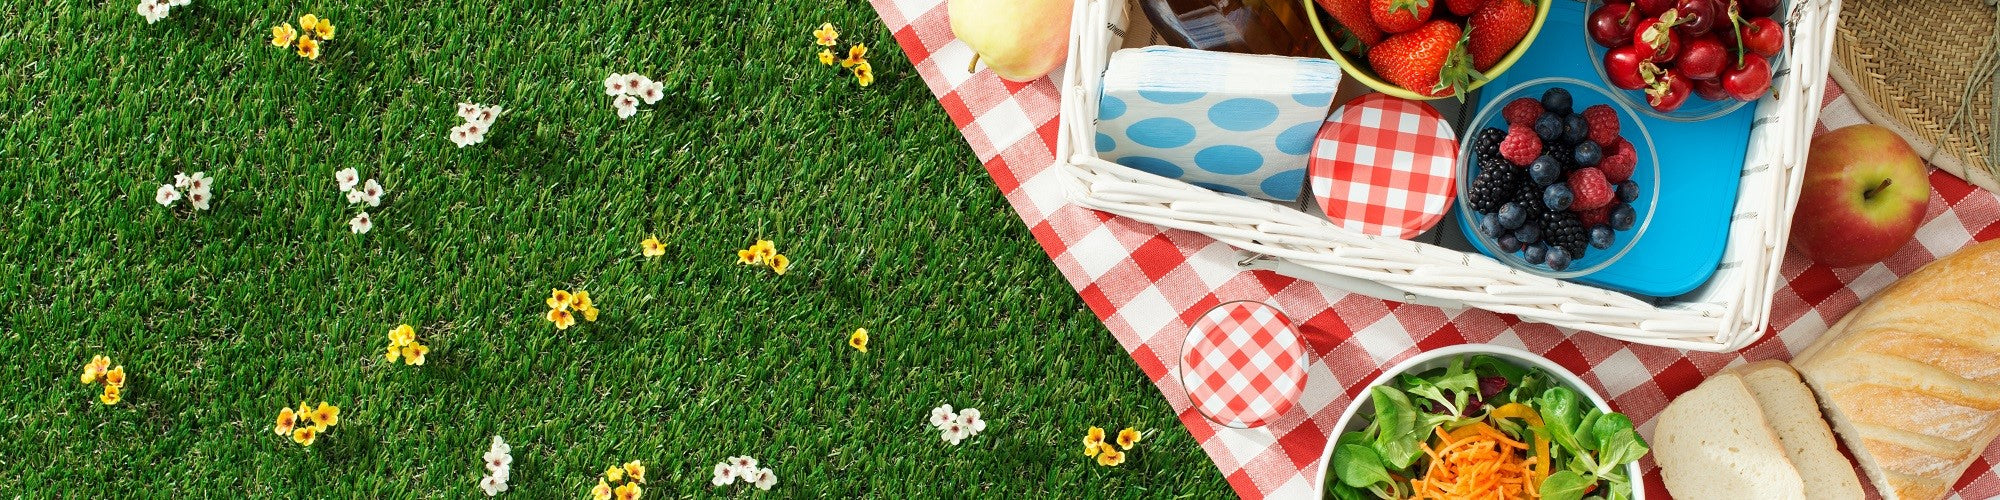 The Art of Picnicking: Planning the Perfect Spring Picnic